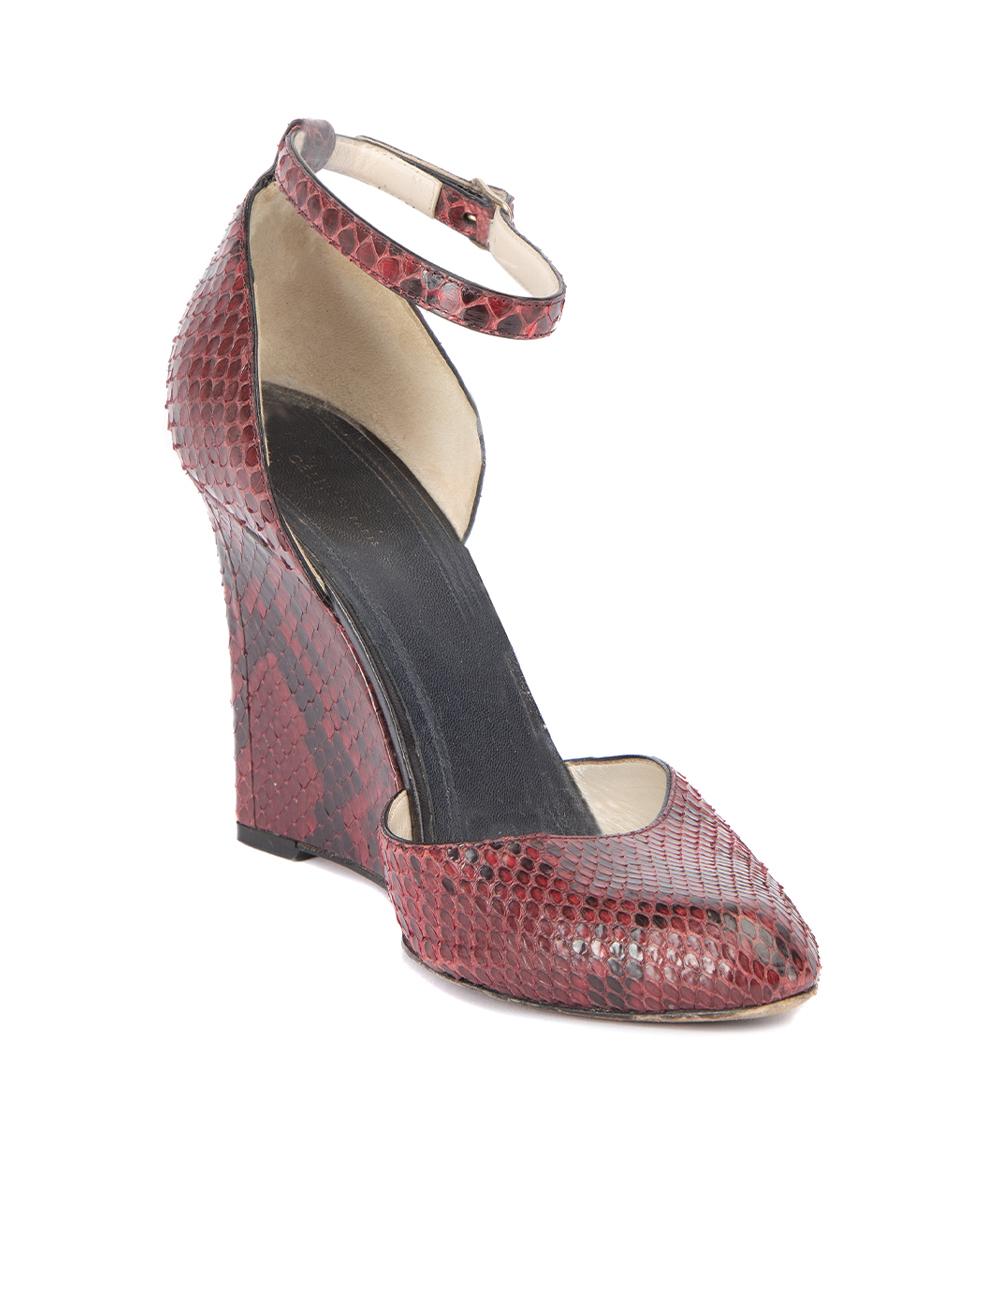 CONDITION is Very good. Minimal wear to wedges is evident. Minimal wear to the snakeskin exterior which is peeling a tiny bit on the right pair of this used Céline designer resale item. This item comes with original dustbag.  Details  Burgundy